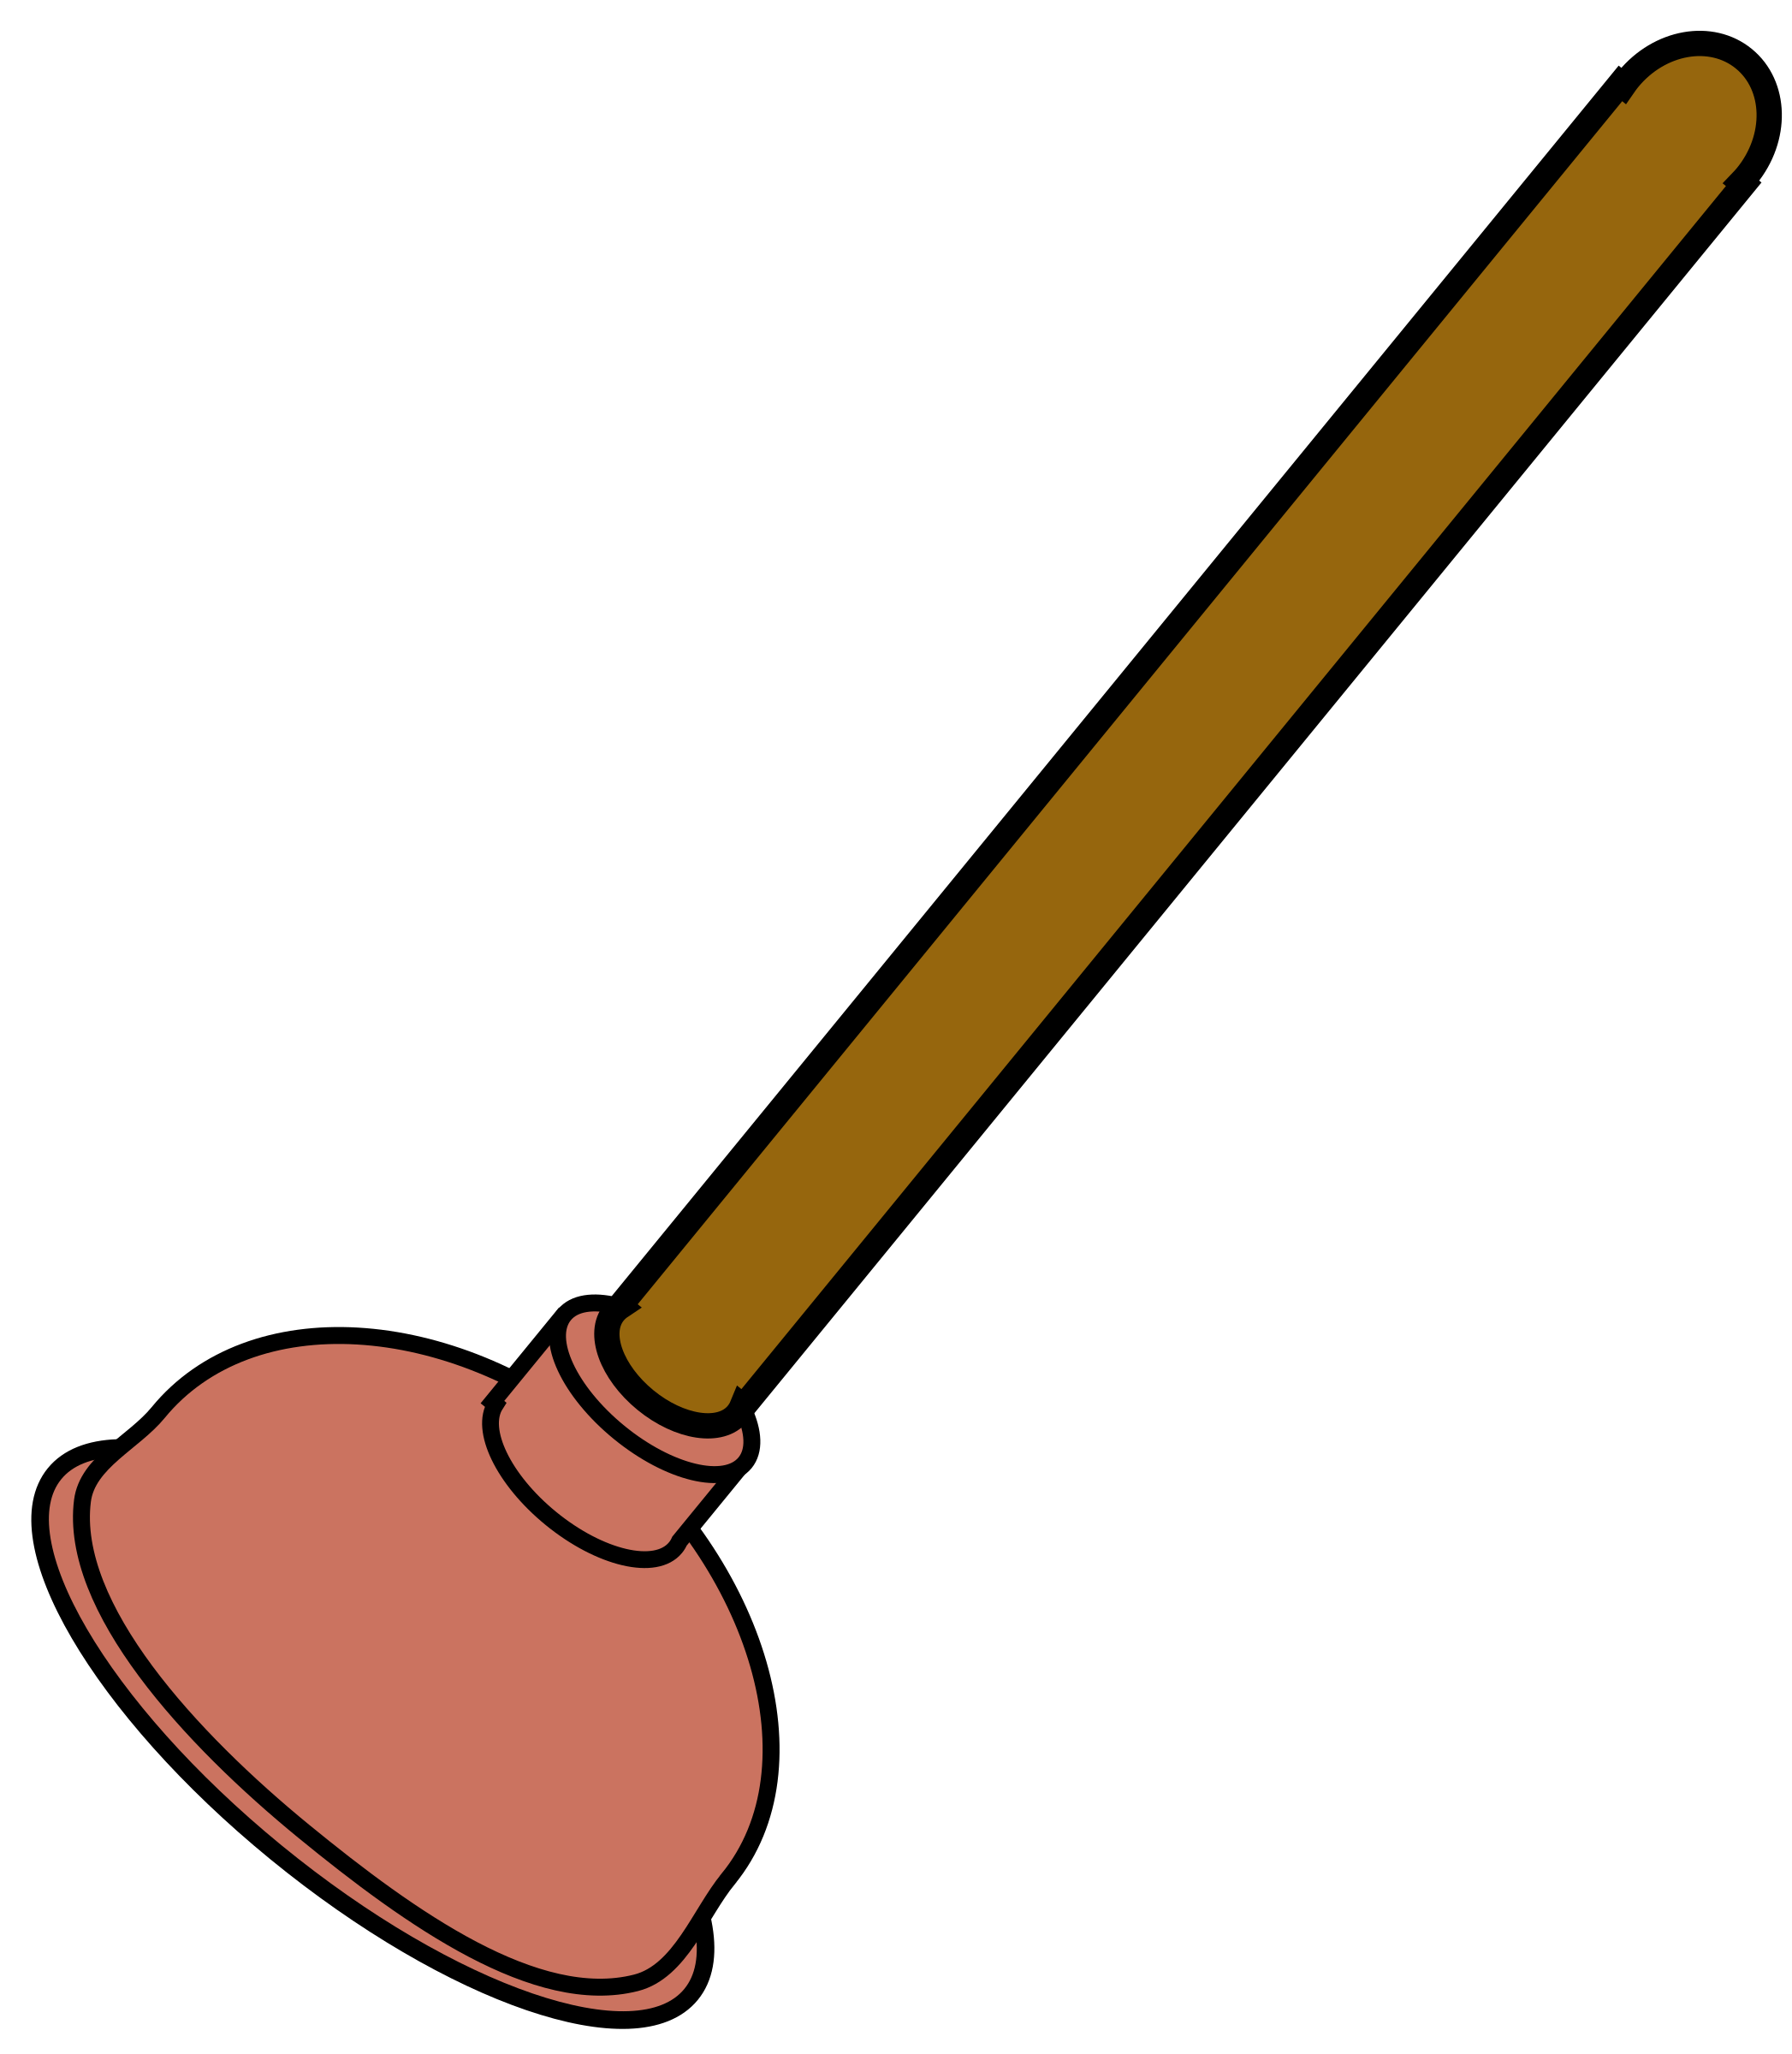 Toilet plunger big image. Plumber clipart animated